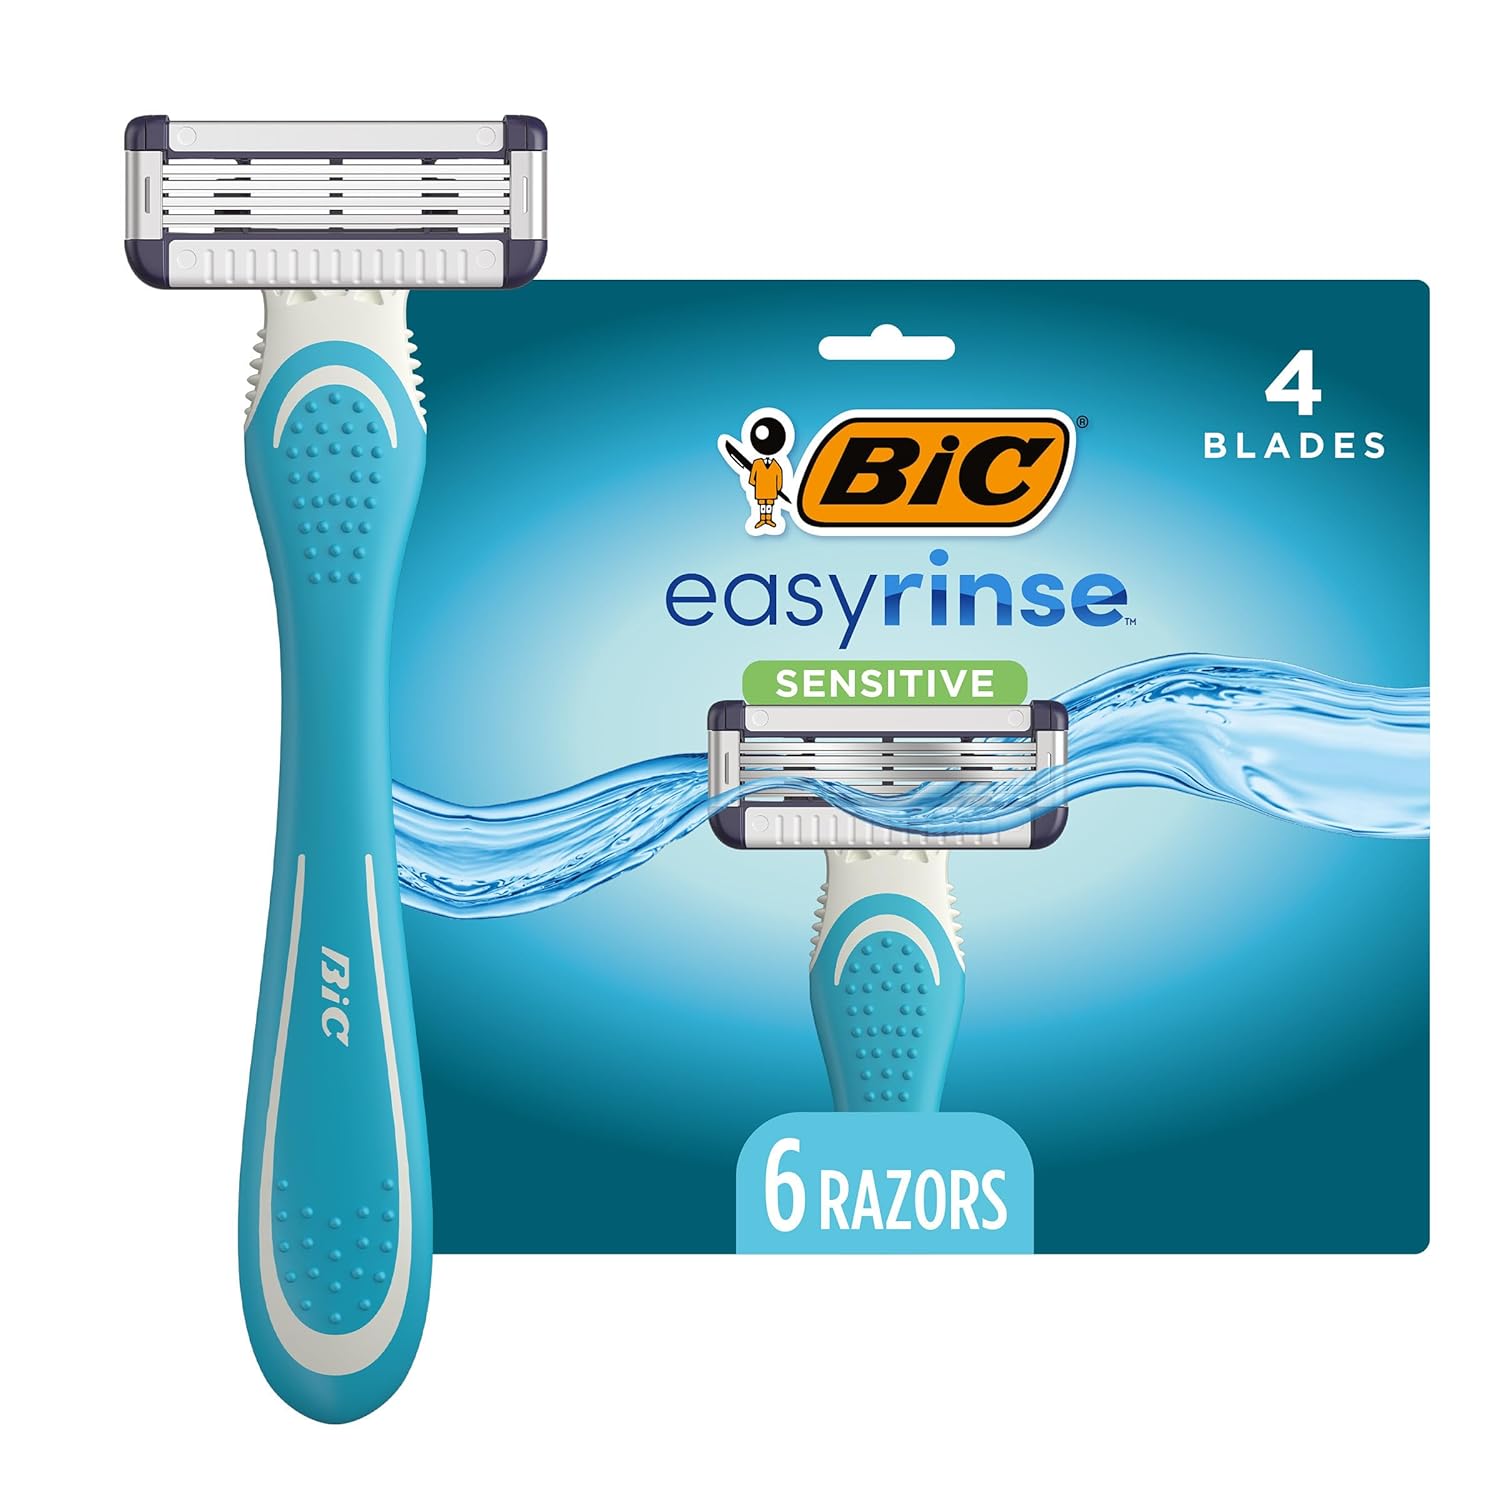 Super affordable! These are my daily razors. Soo many come with the pack. No longer feel the pain in my wallet as I shave everyday. My girl enjoys the fresh barber look every day when I use them.